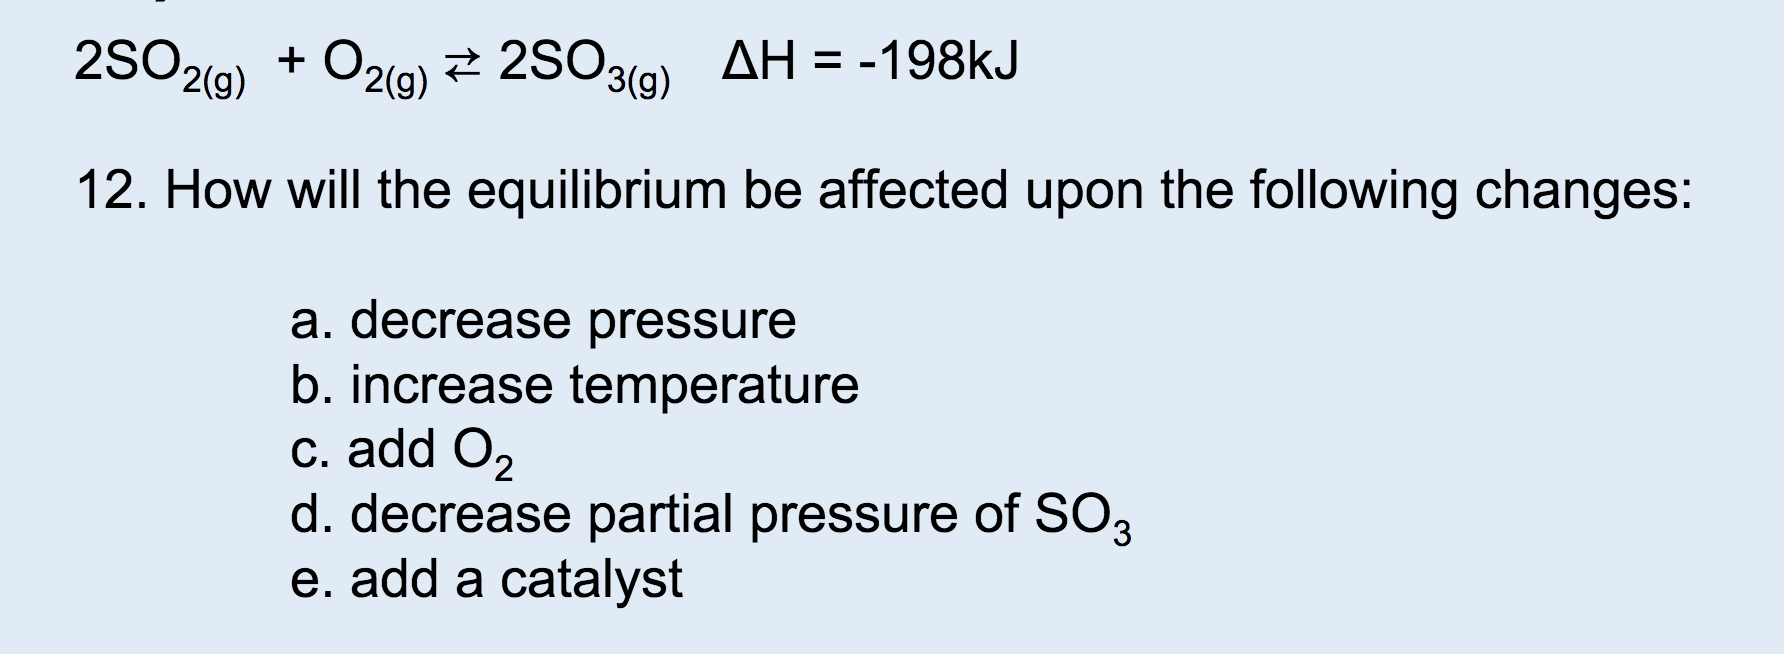 2SO2(g)02(g) 2SO3(a) AH = -198kJ
12. How will the equilibrium be affected upon the following changes:
a. decrease pressure
b. increase temperature
c. add O2
d. decrease partial pressure of SO3
e. add a catalyst
